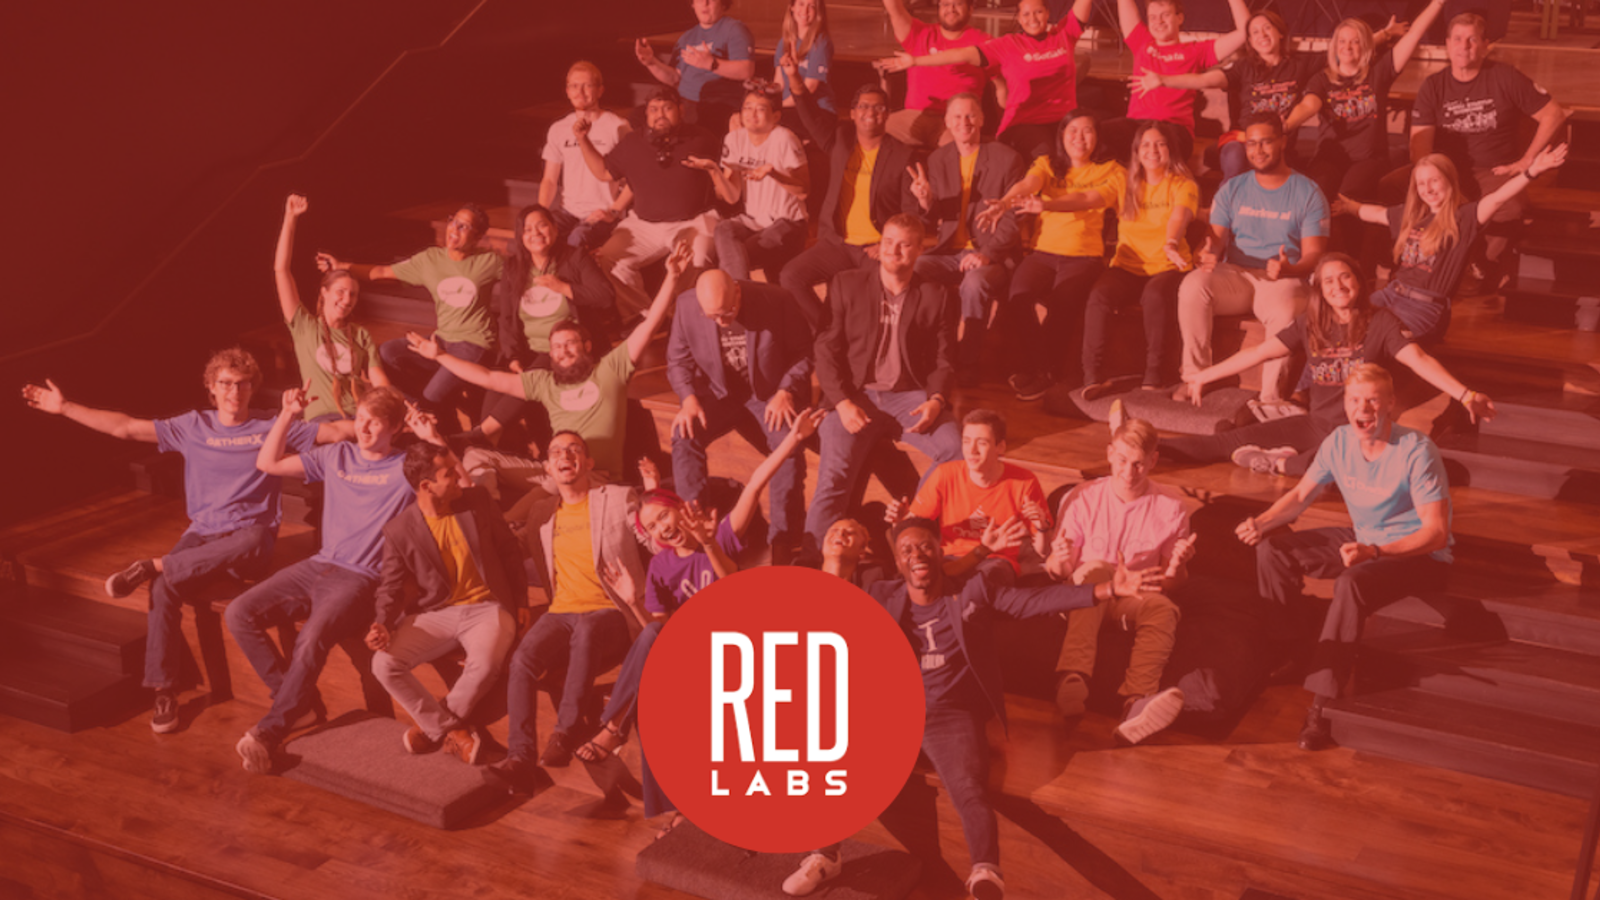 In Partnership with RedLabs, Group of students with RedLabs logo